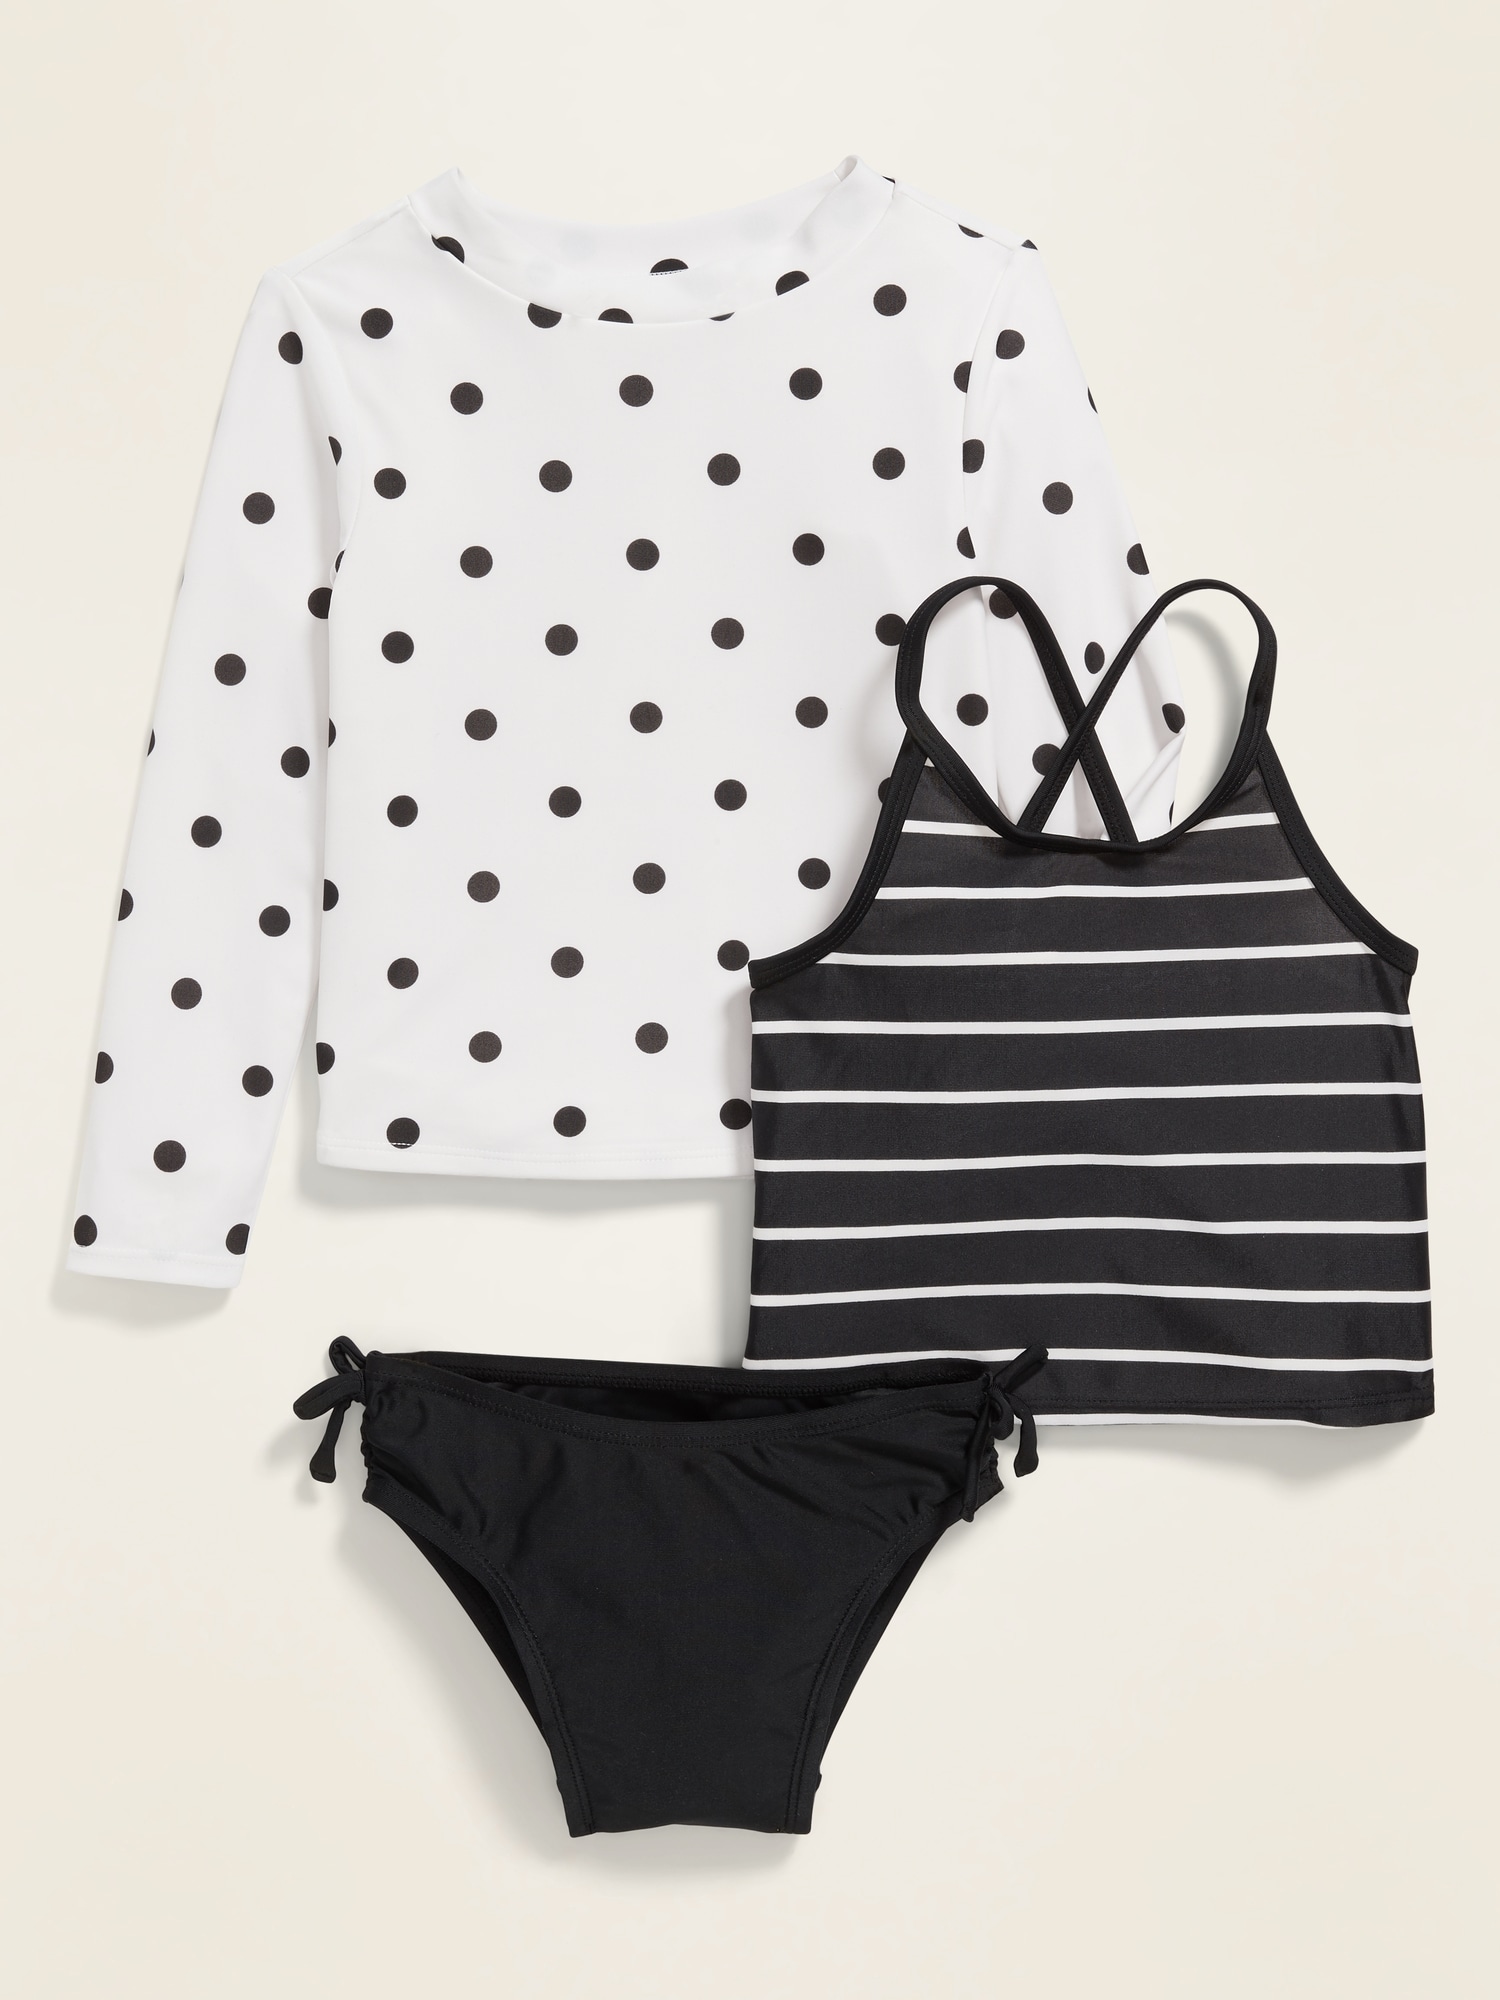 03 white with black polka dots long sleeve bathing suit with